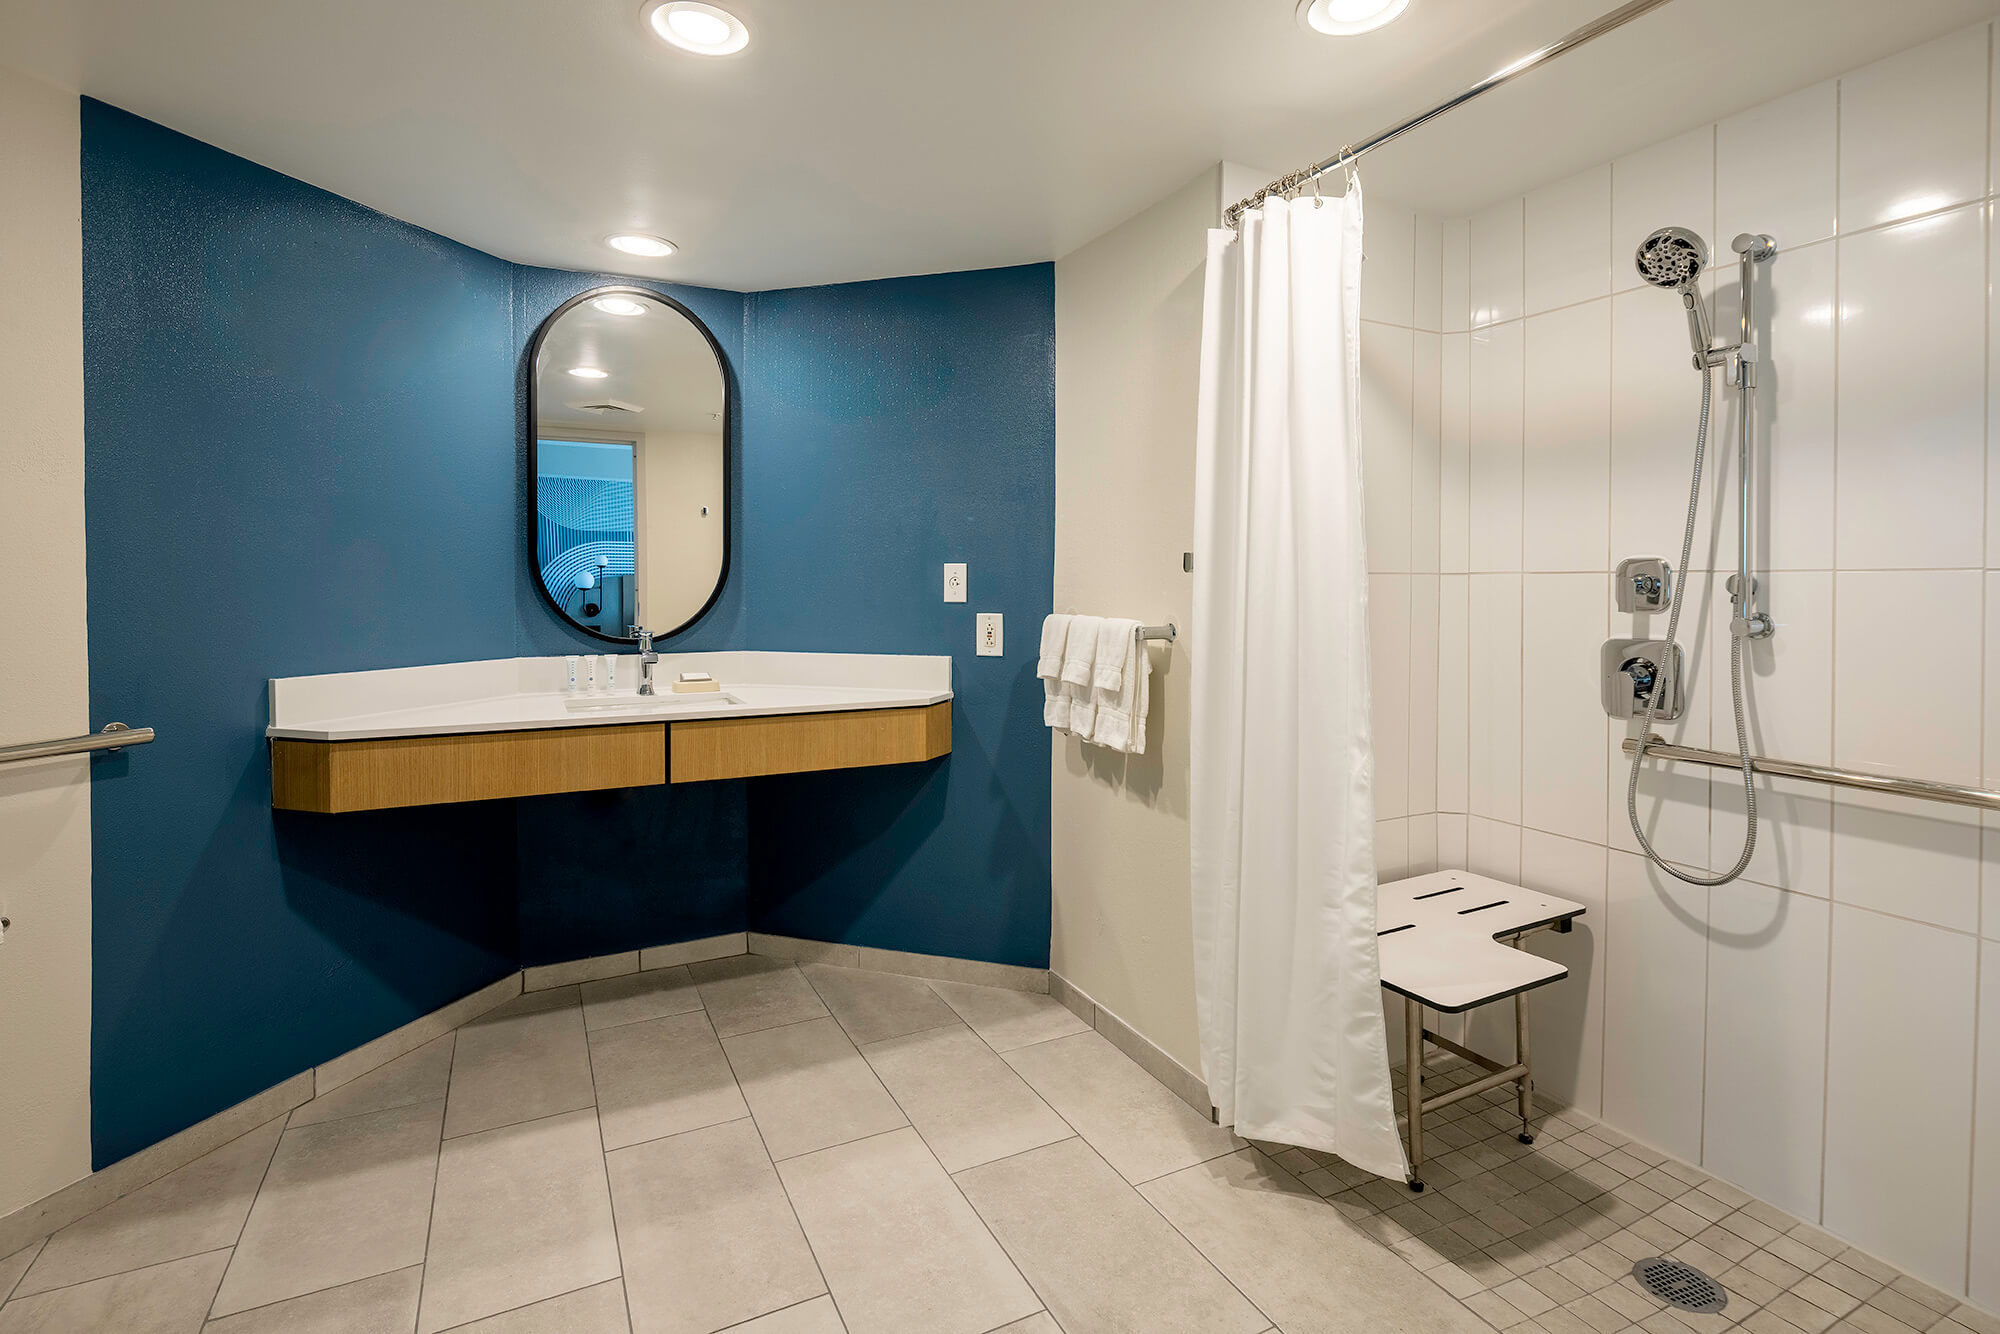 An accessible washroom with roll in shower